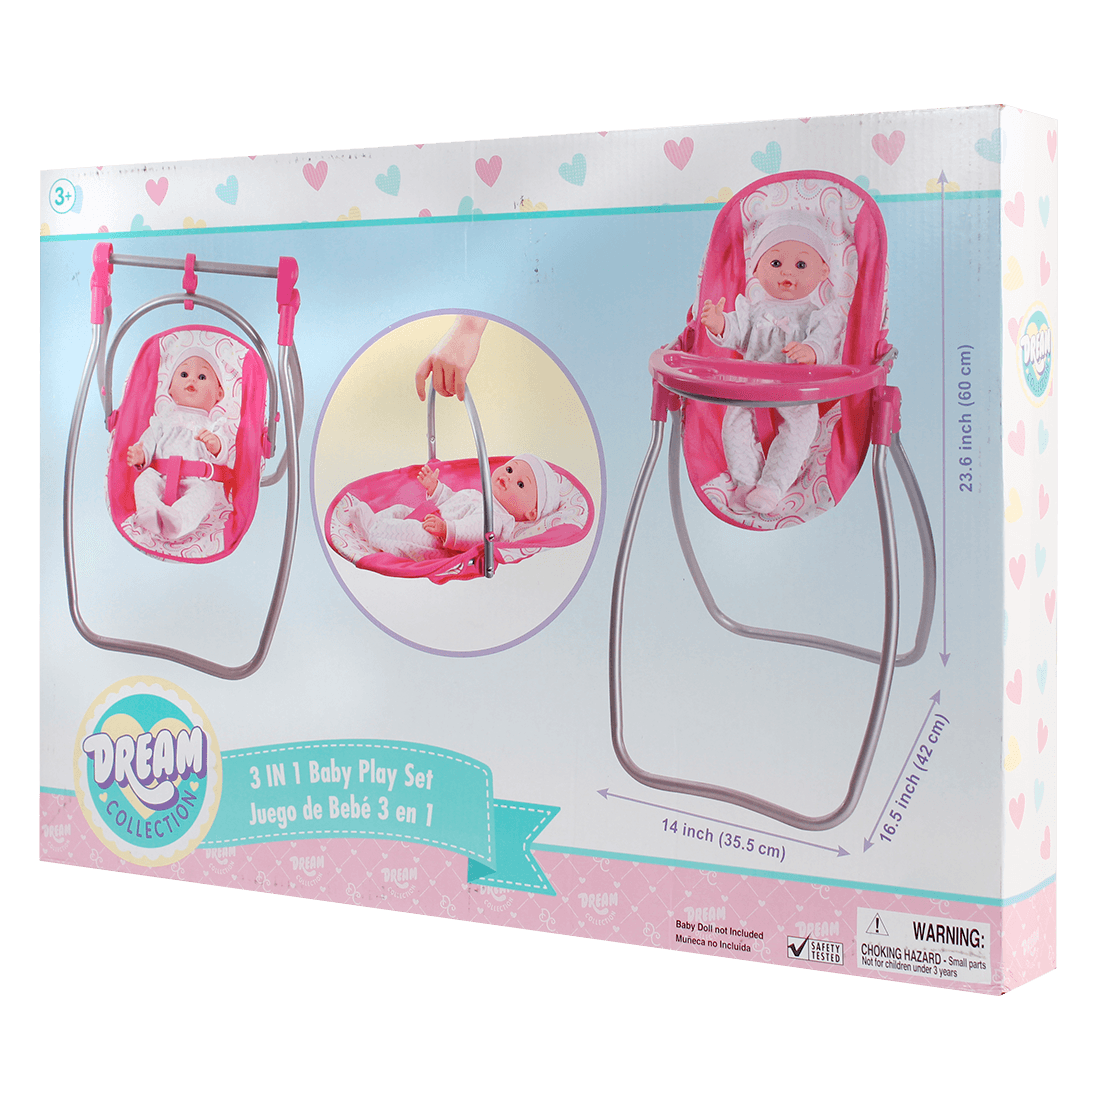 Dream Collection, Baby Doll Care Gift Set with Stroller - Lifelike Baby  Doll and Accessories for Realistic Pretend Play, Posable Soft Toy - 12”